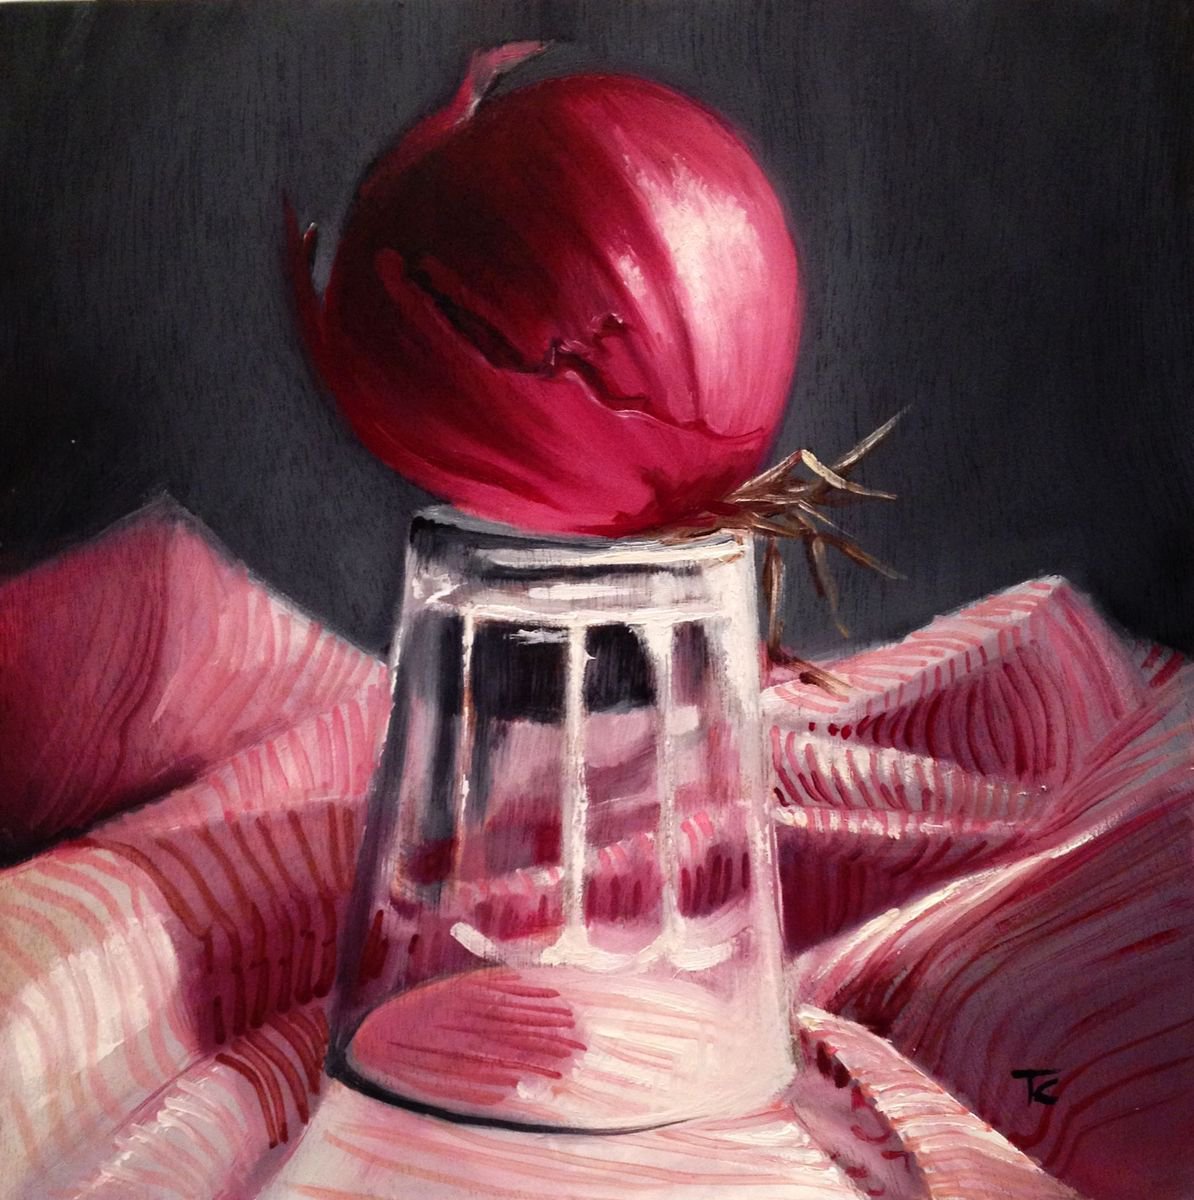 Red Onion in dark room - original oil painting on wooden panel edged - Ready to hang20 x... by Carlo Toma